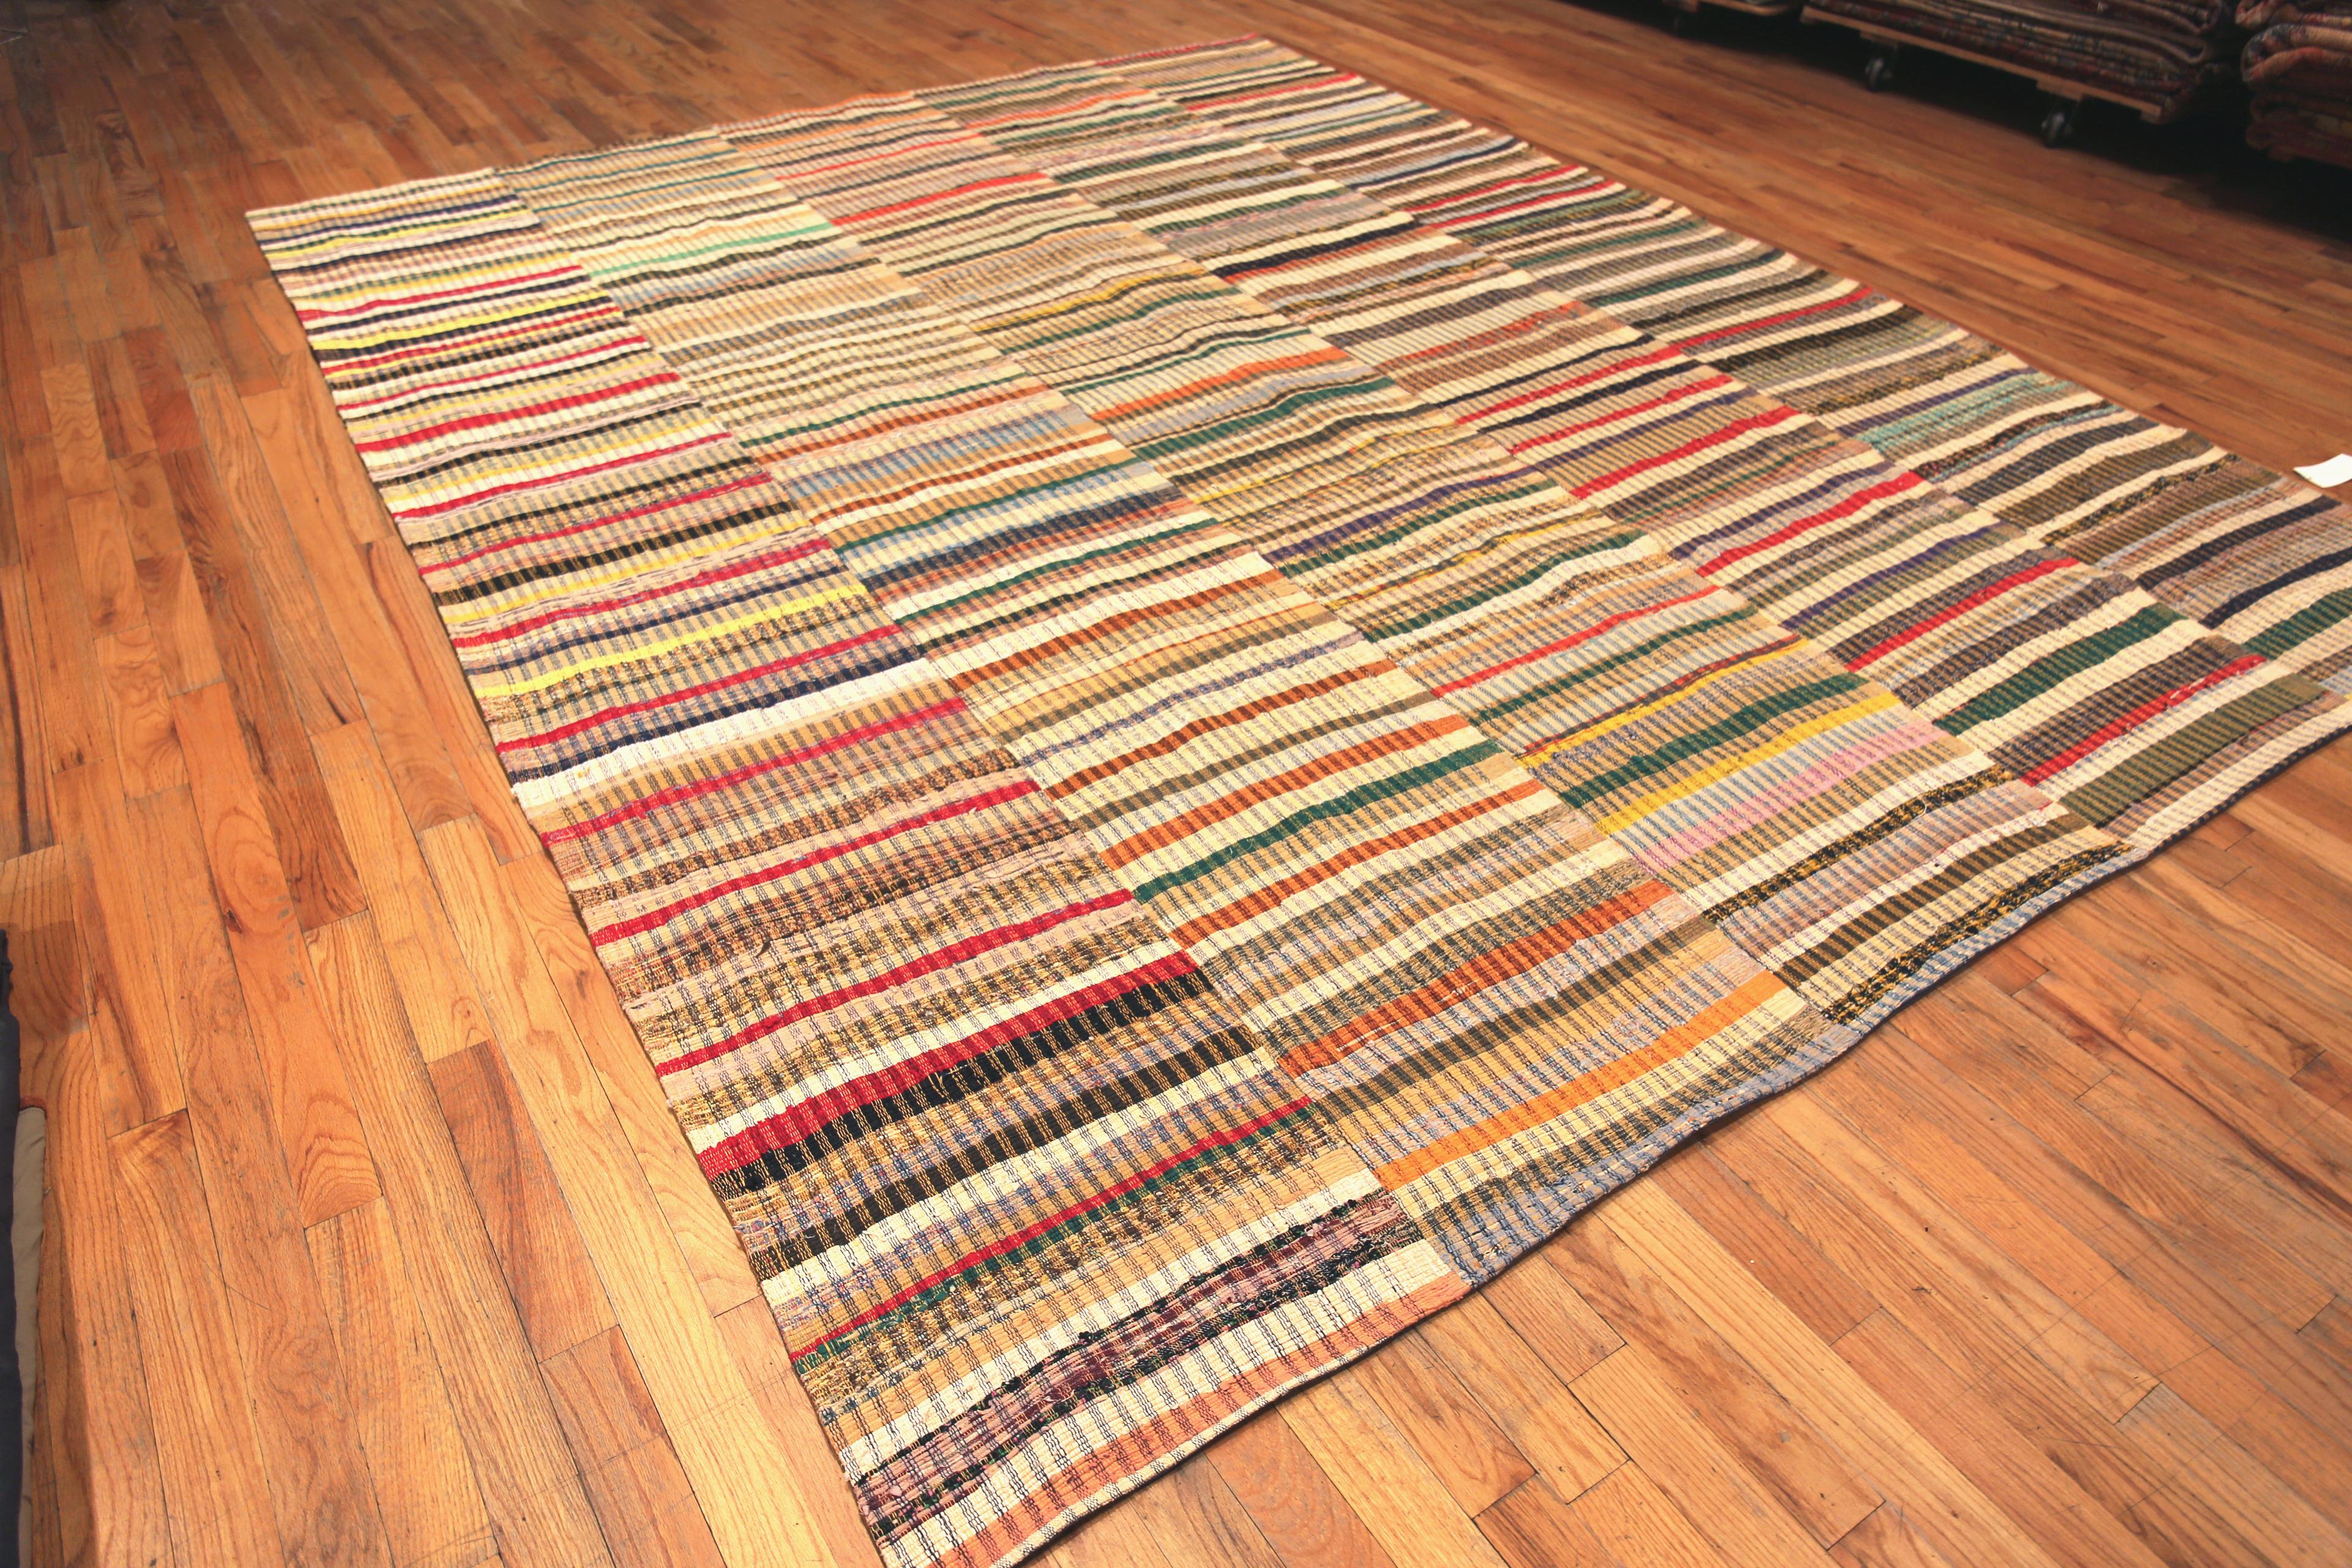 Colorful Modern Rag Rug, Country of Origin: Modern Turkish Rugs. Circa date: Modern. Size: 10 ft x 12 ft 10 in (3.05 m x 3.91 m)